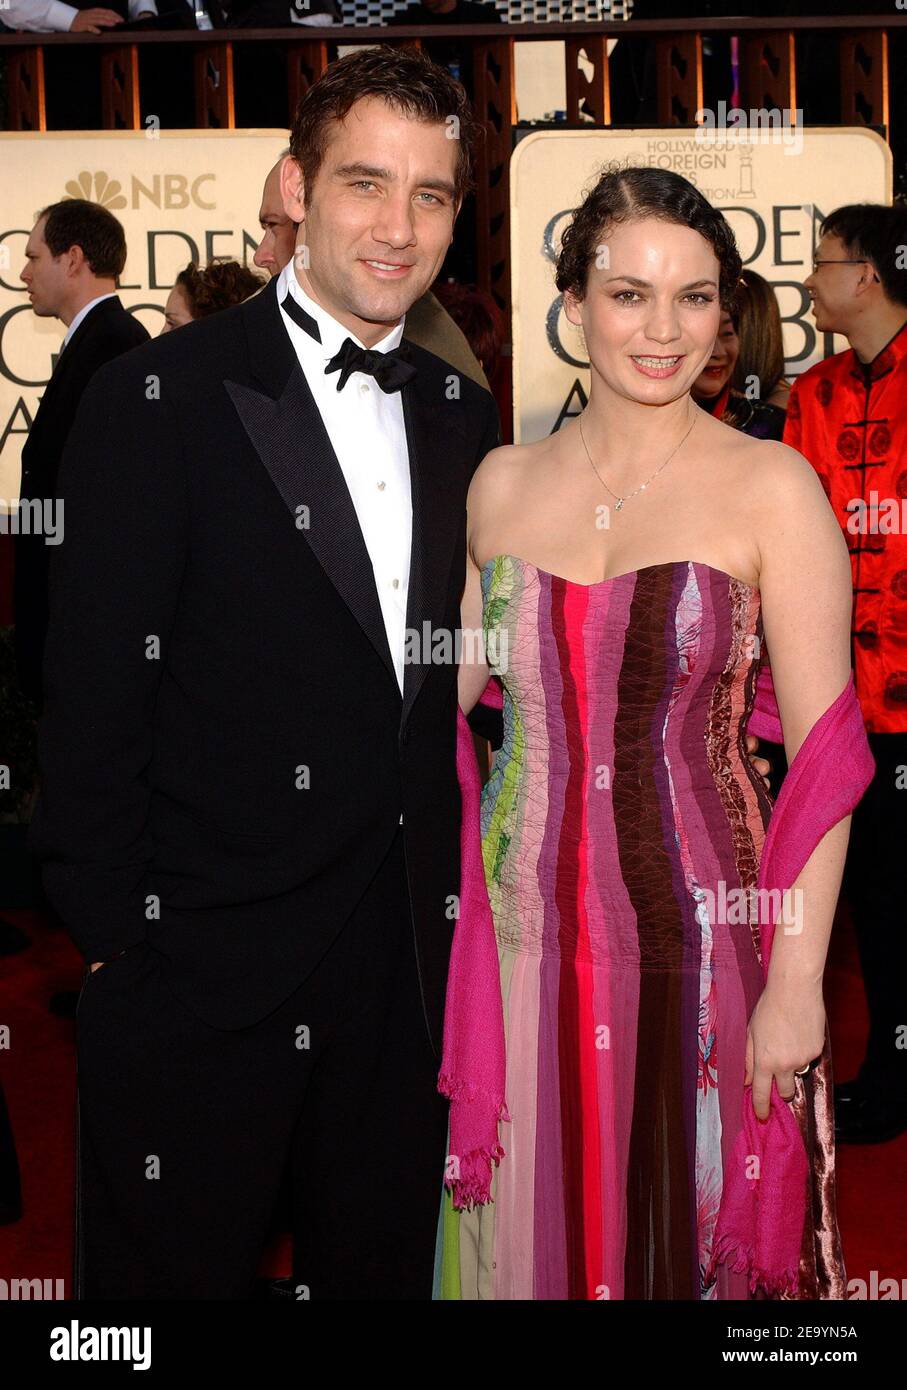 Clive Owen and Sarah-Jane Fenton arriving at the 62nd Annual Golden Globe Awards in Los Angeles, CA, USA, on January 16, 2005. Photo by Hahn-Khayat/ABACA Stock Photo